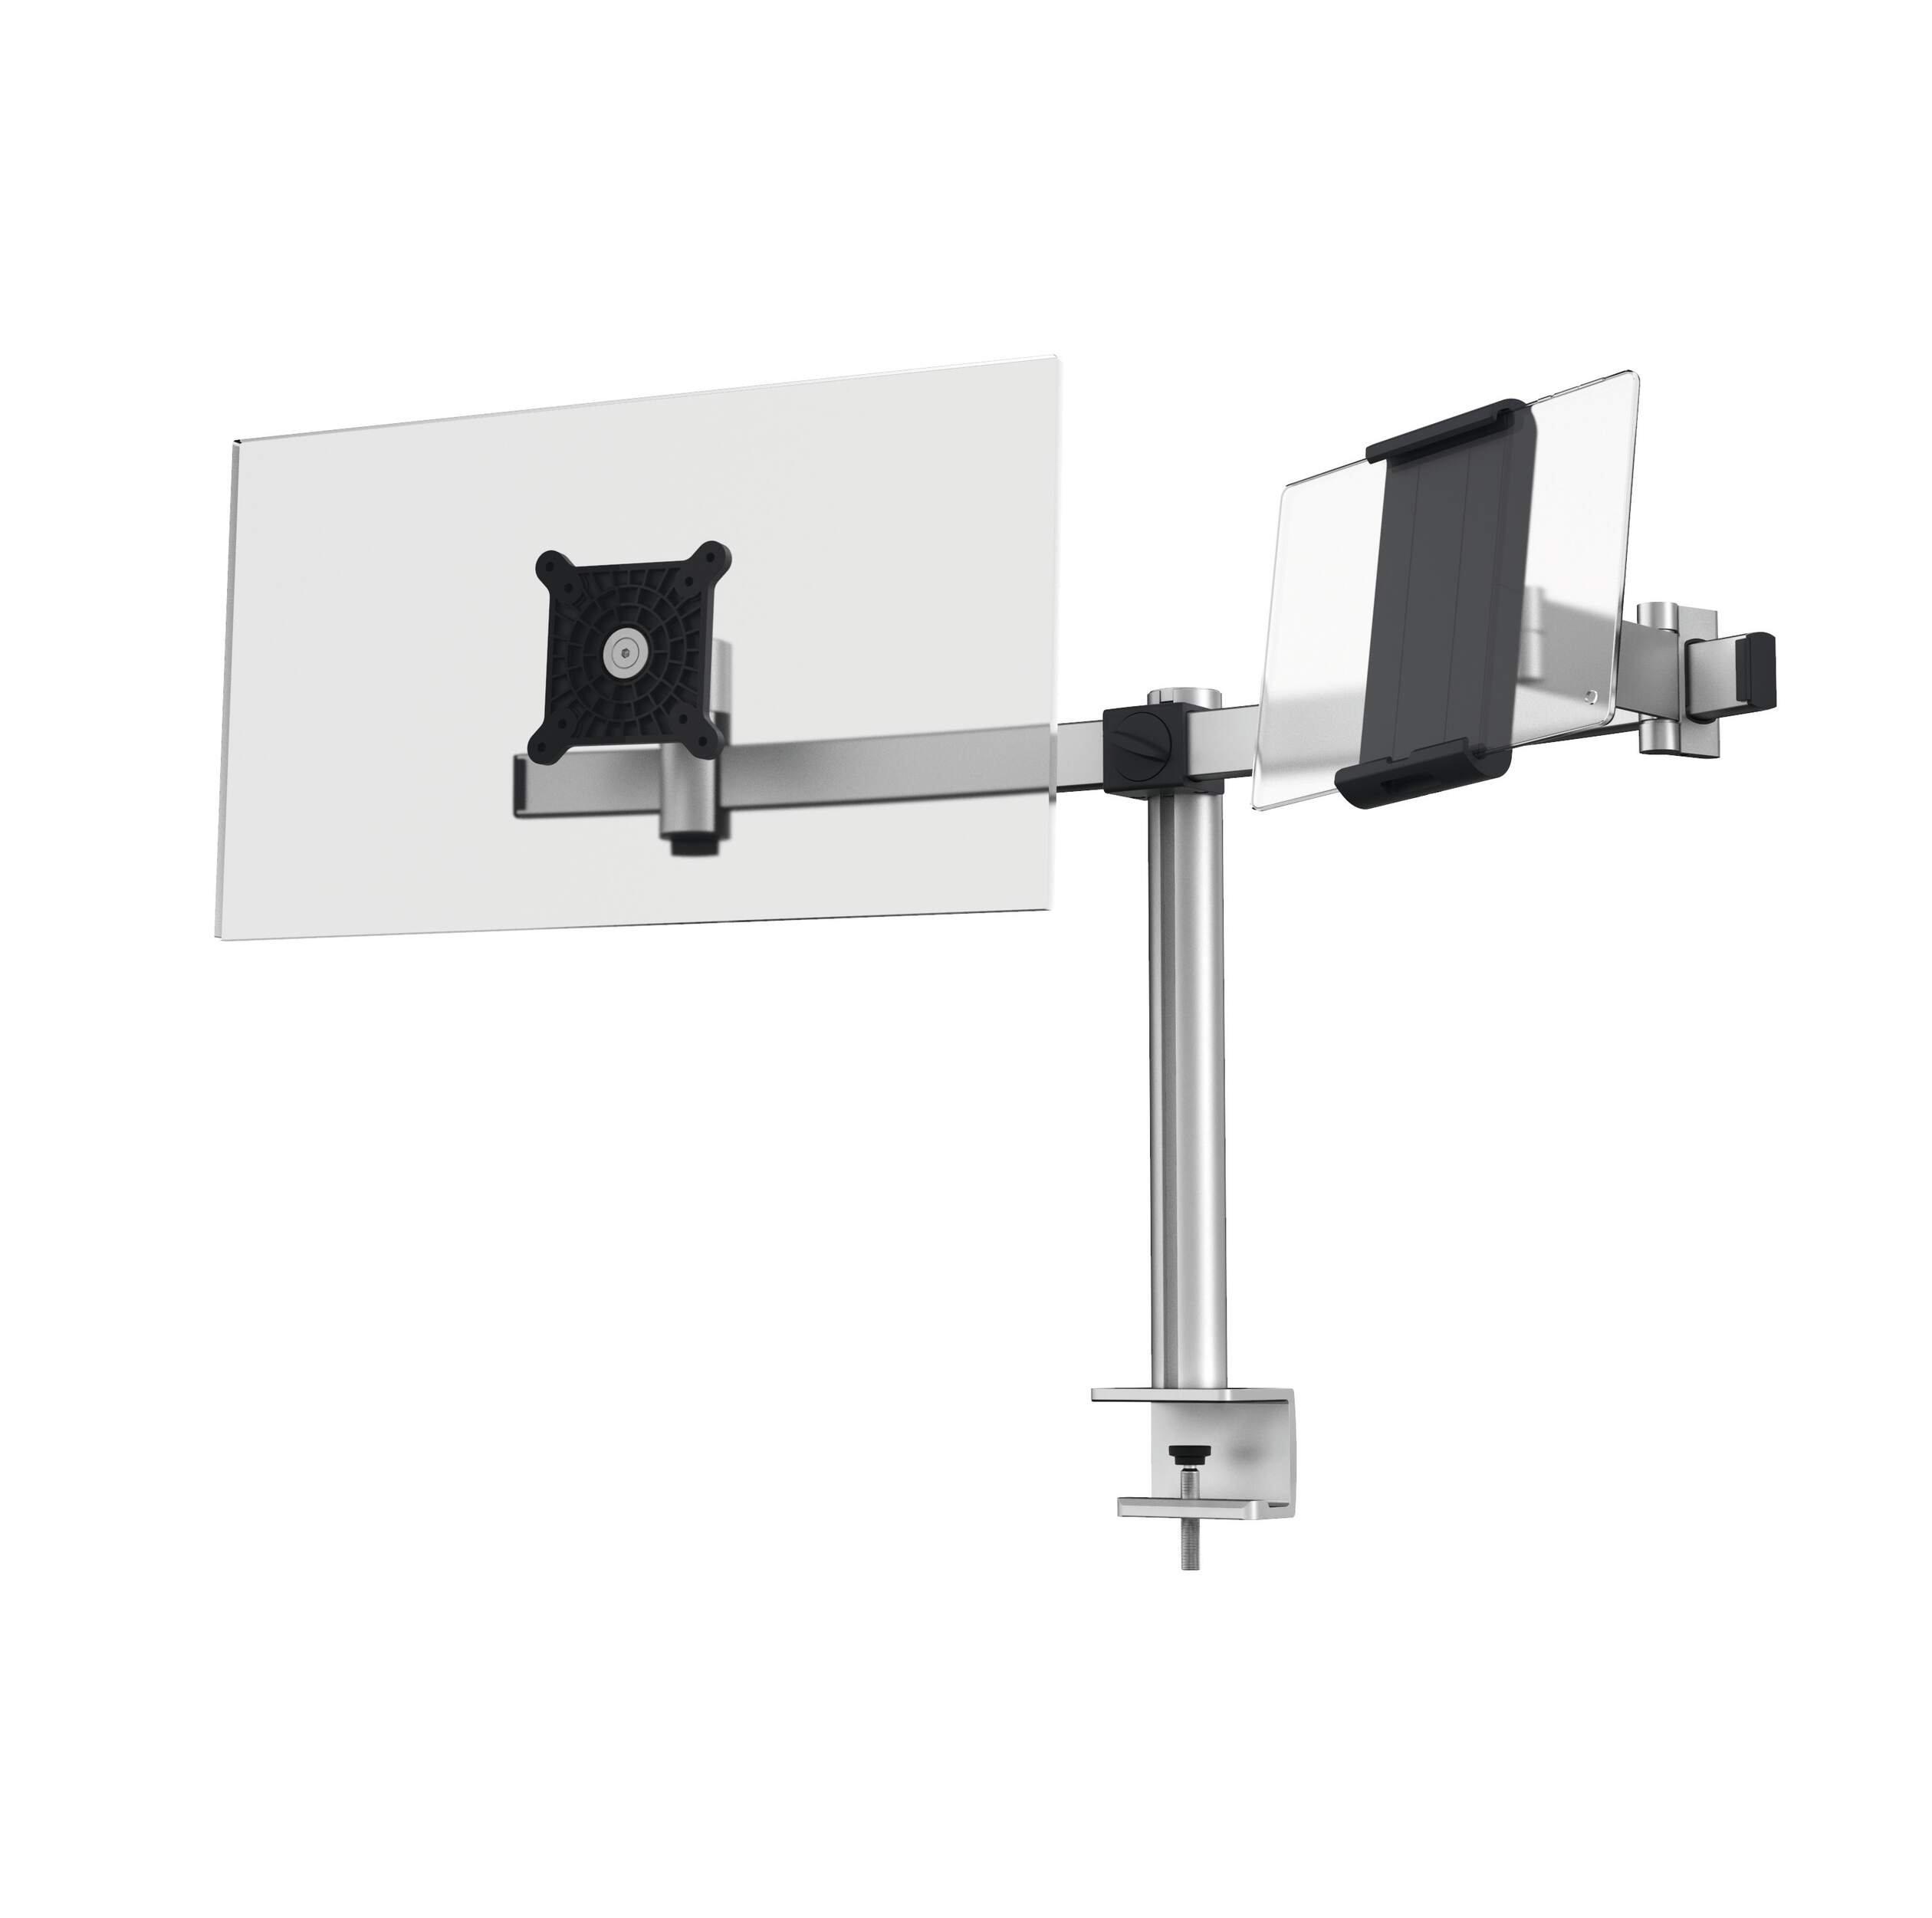 Monitor Mount for 1 Screen & 1 Tablet - Desk Clamp Attachment